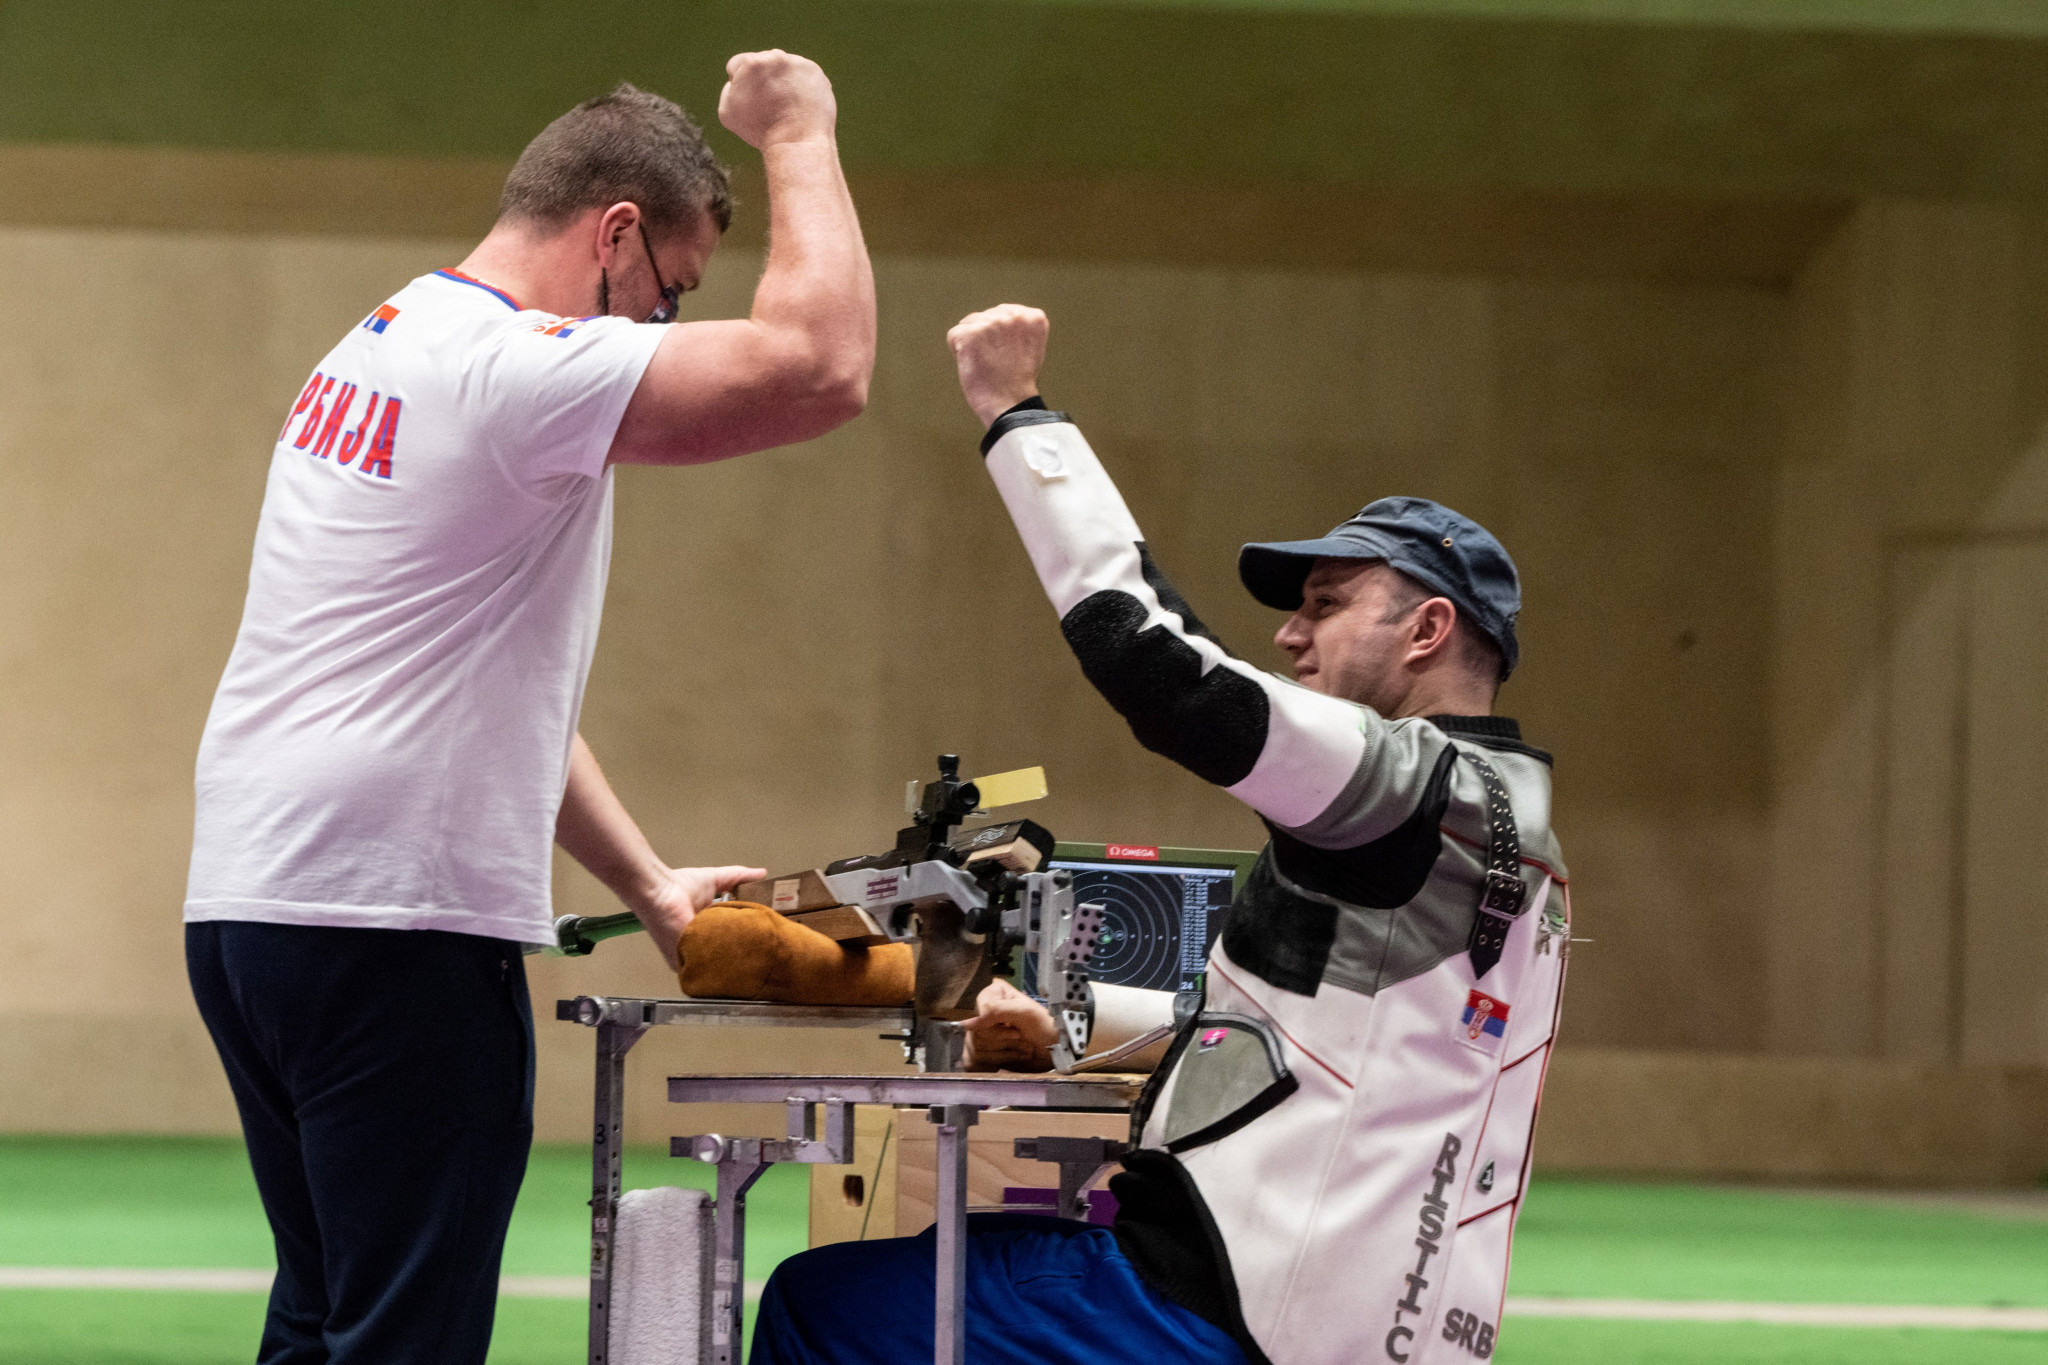 Serbia's Dragan Ristic, pictured seated, won two golds at the World Shooting Para Sport Grand Prix in Novi Sad ©Getty Images